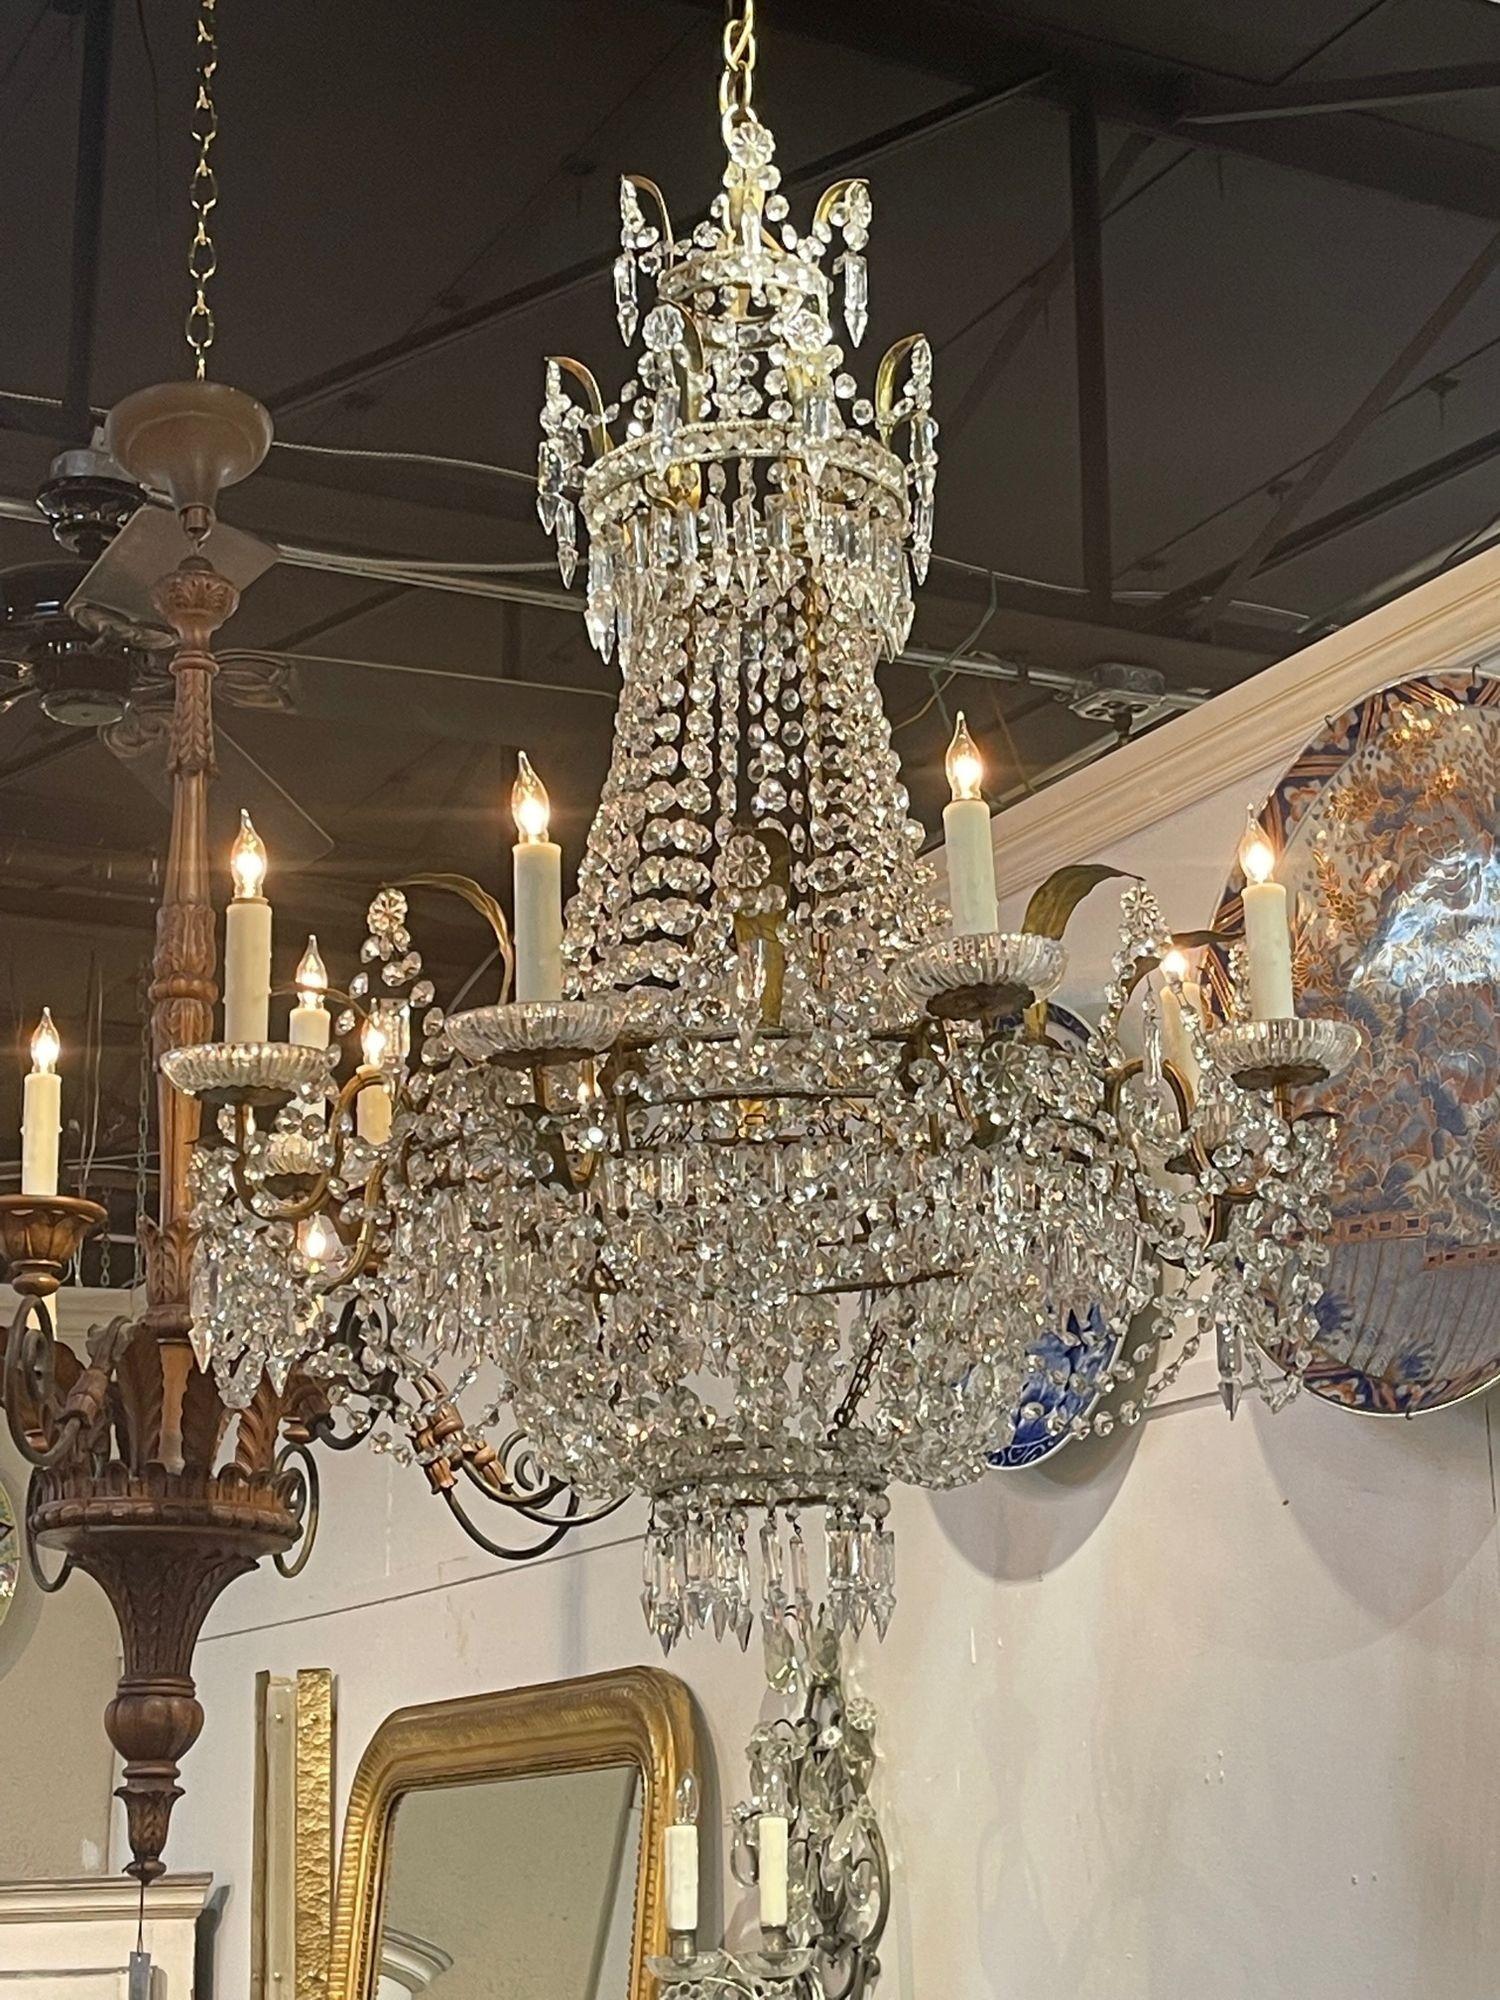 Beautiful 19th century French Empire style basket form chandeliers. A lovely traditional style covered in gorgeous crystals. Sure to be a focal point in a lovely home!.